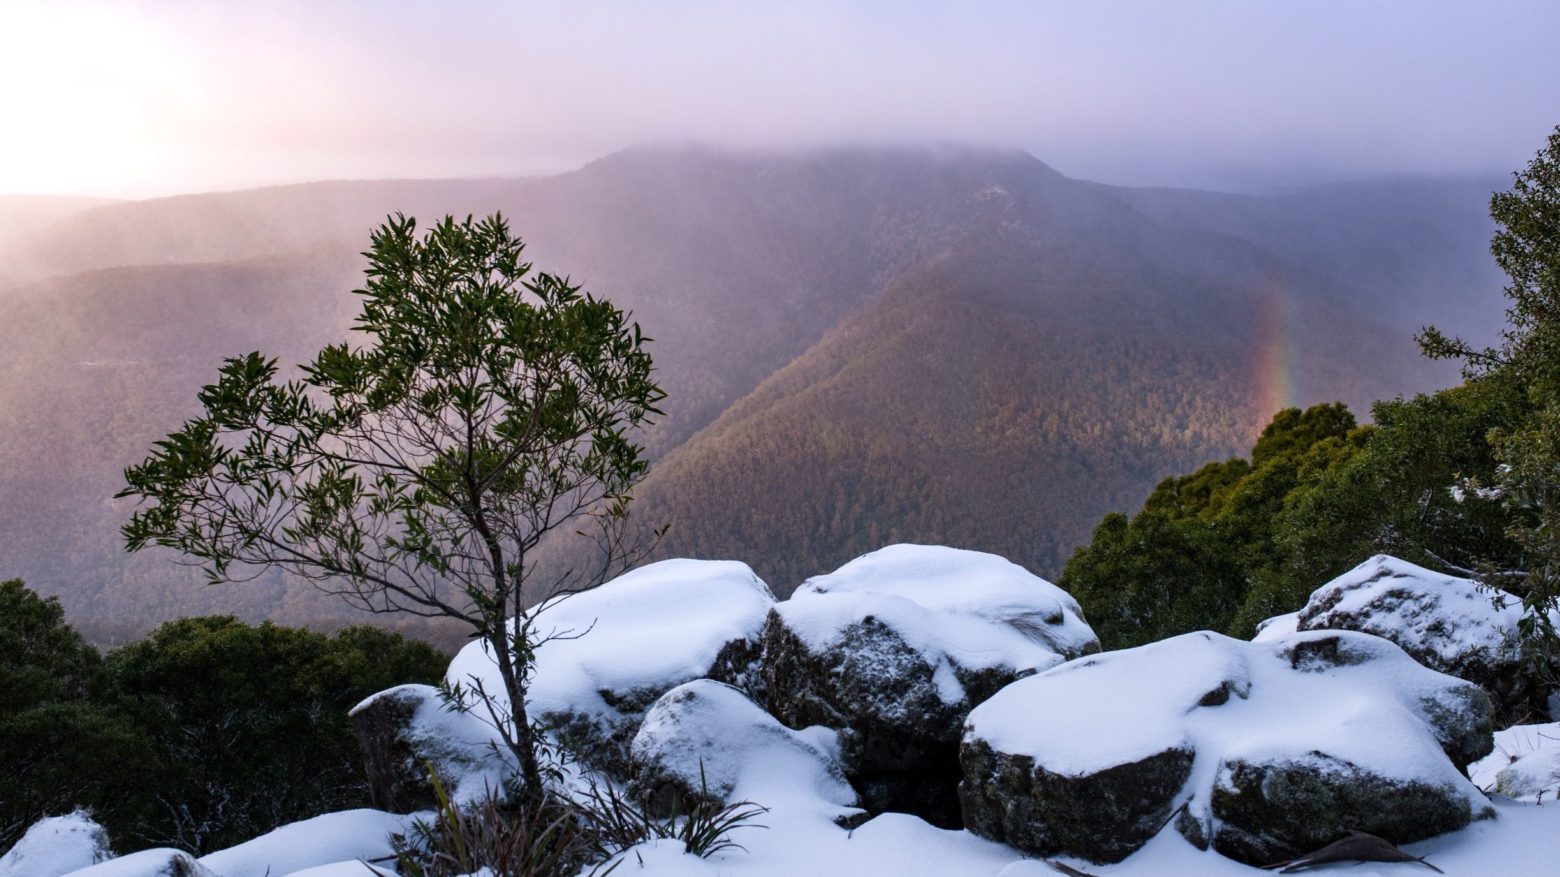 Seeing Barrington Tops snow is a favourite.